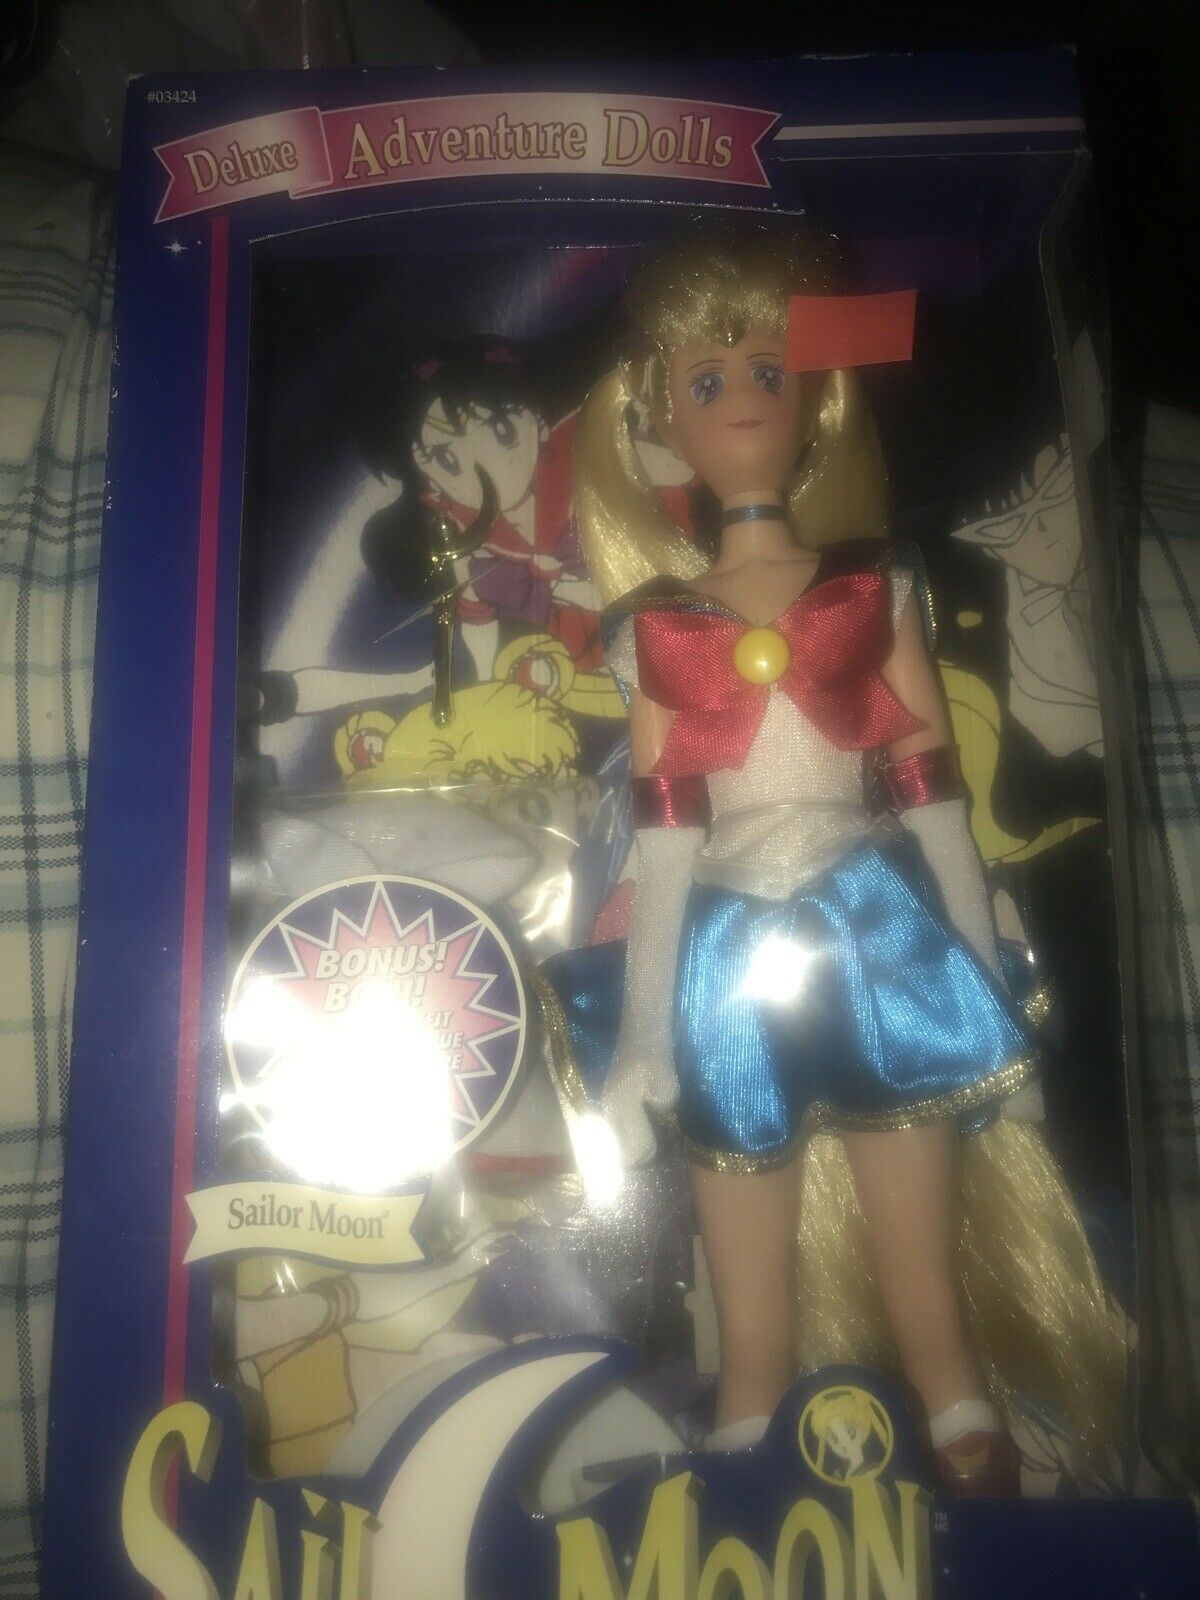 1997 Sailor Moon Deluxe Adventure Doll By Irwin #3424 - Hard To Find